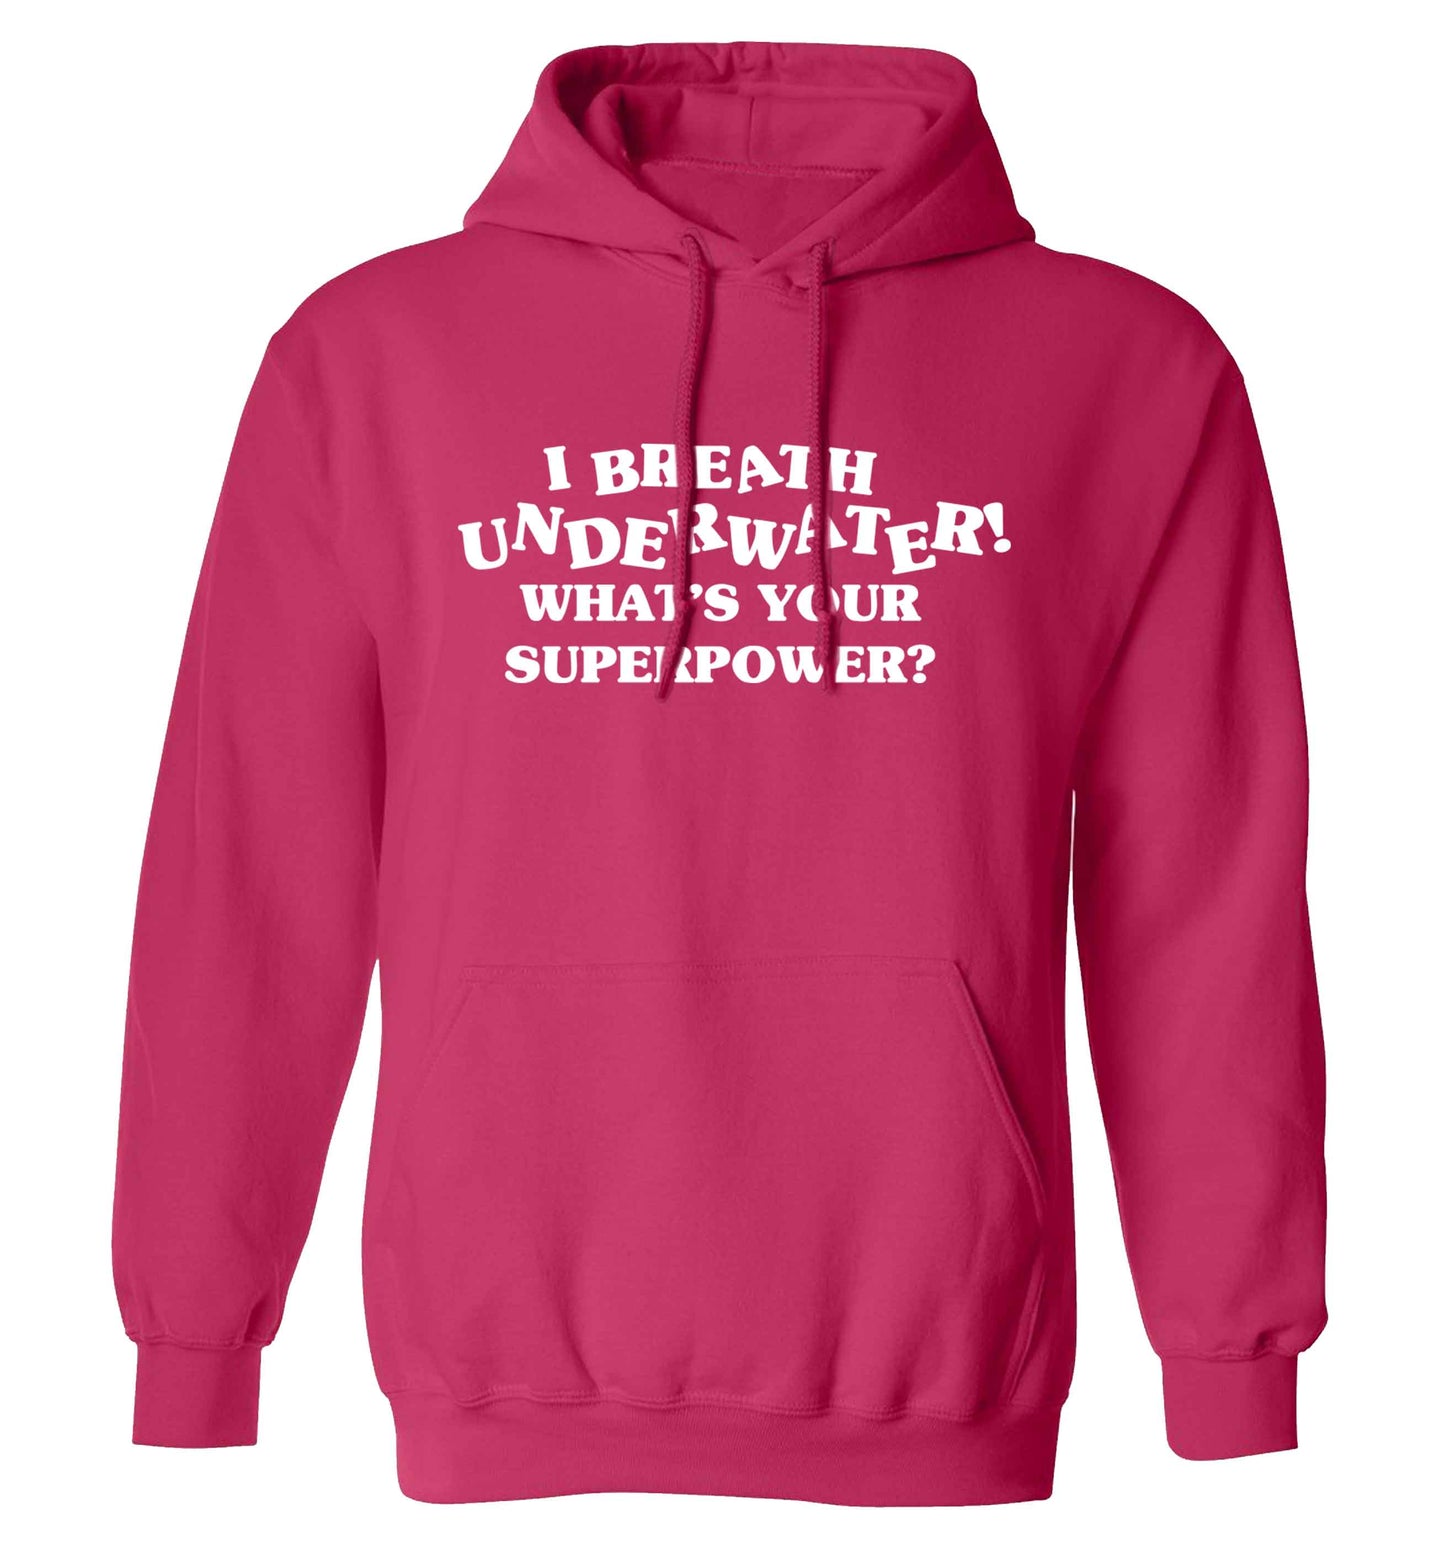 I breath underwater what's your superpower? adults unisex pink hoodie 2XL